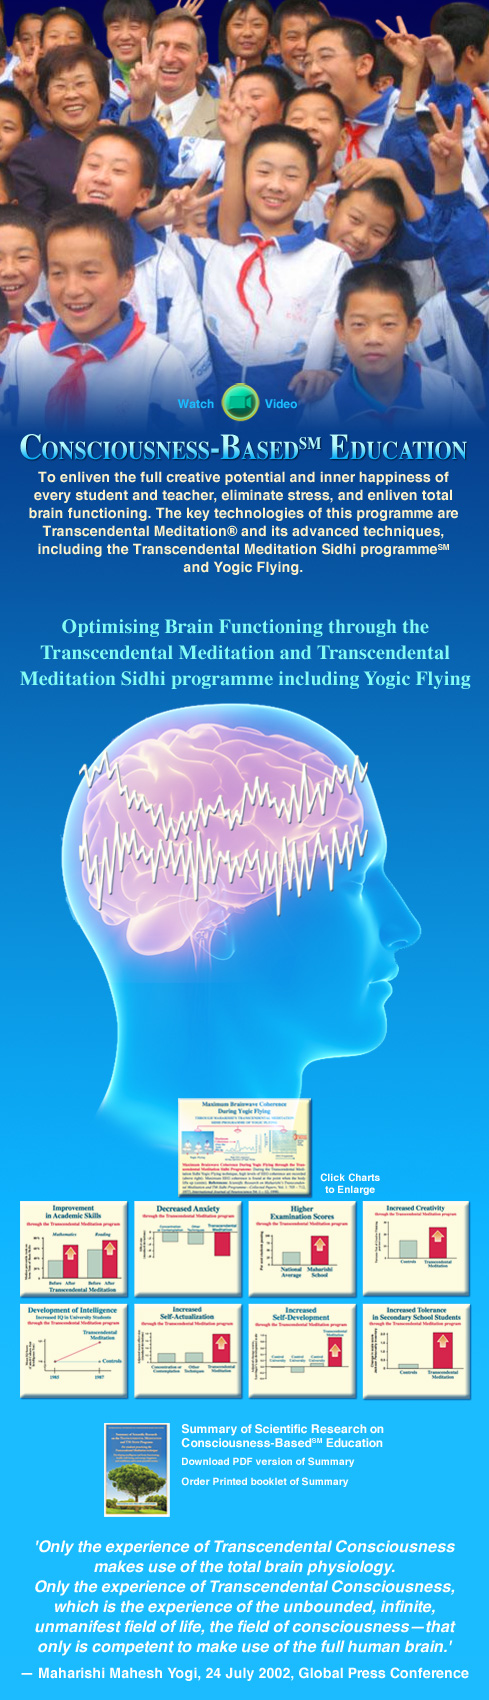 Consciousness Based Education SM: To enliven the full creative potential and inner happiness of every student and teacher, eliminate stress, and enliven total brain functioning. The key technologies of this programme are Transcendental Meditation and its advanced techniques, including the Transcendental Meditation Sidhi Programme and Yogic Flying.